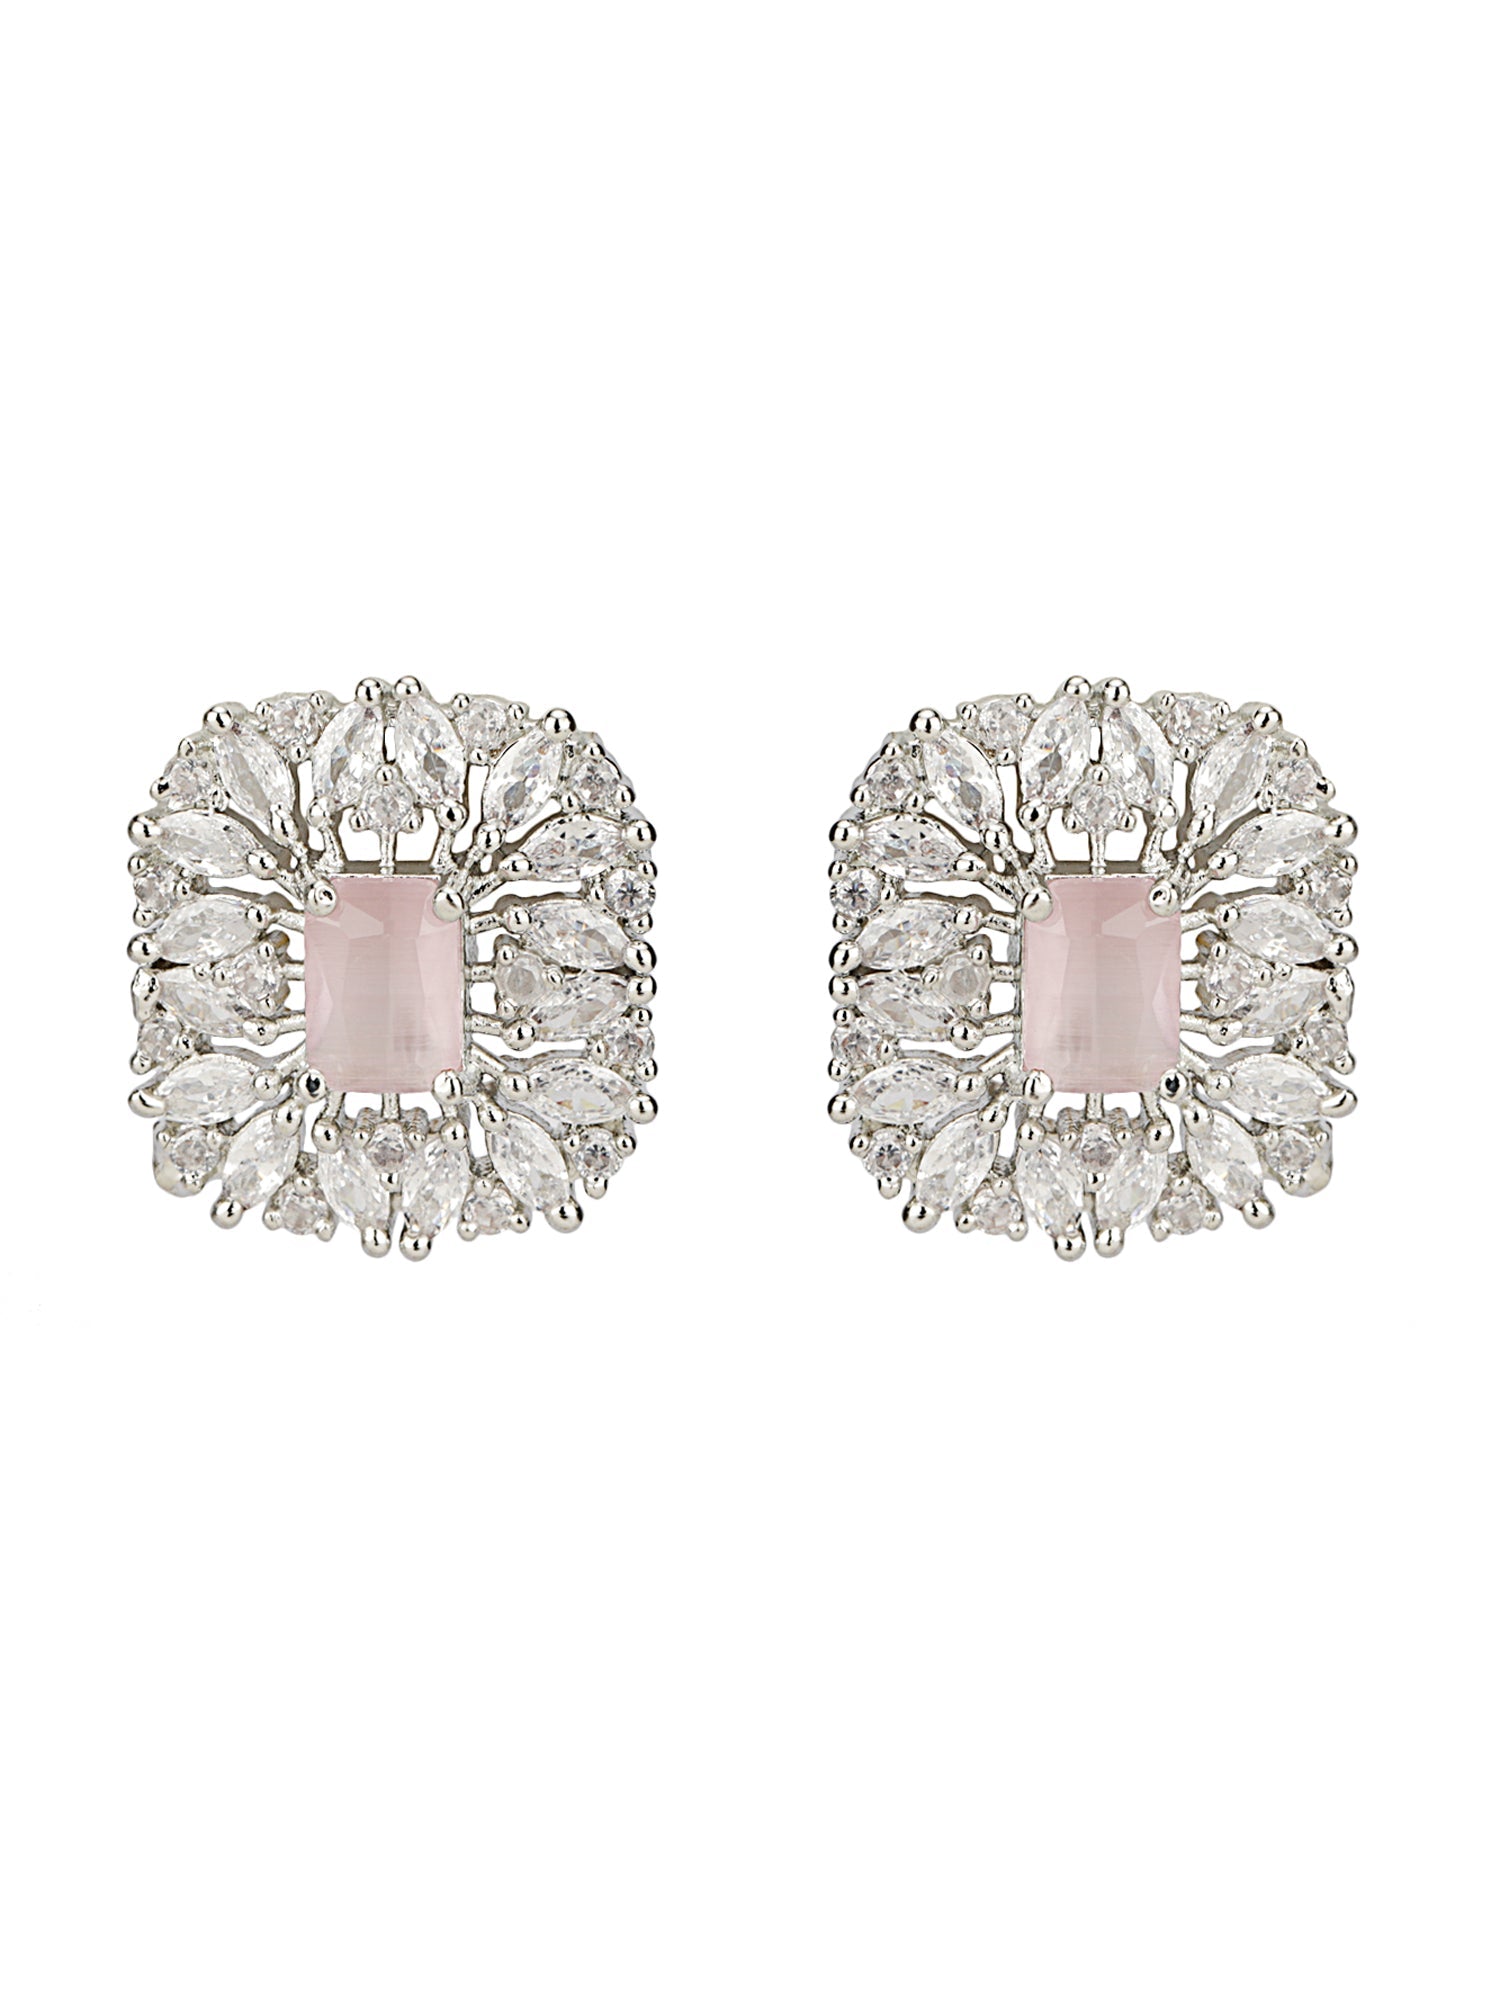 Mekkna Women's Stone Stud Earrings . High-quality materials and elegant stone detailing make these earrings a must-have for any fashion-forward woman.